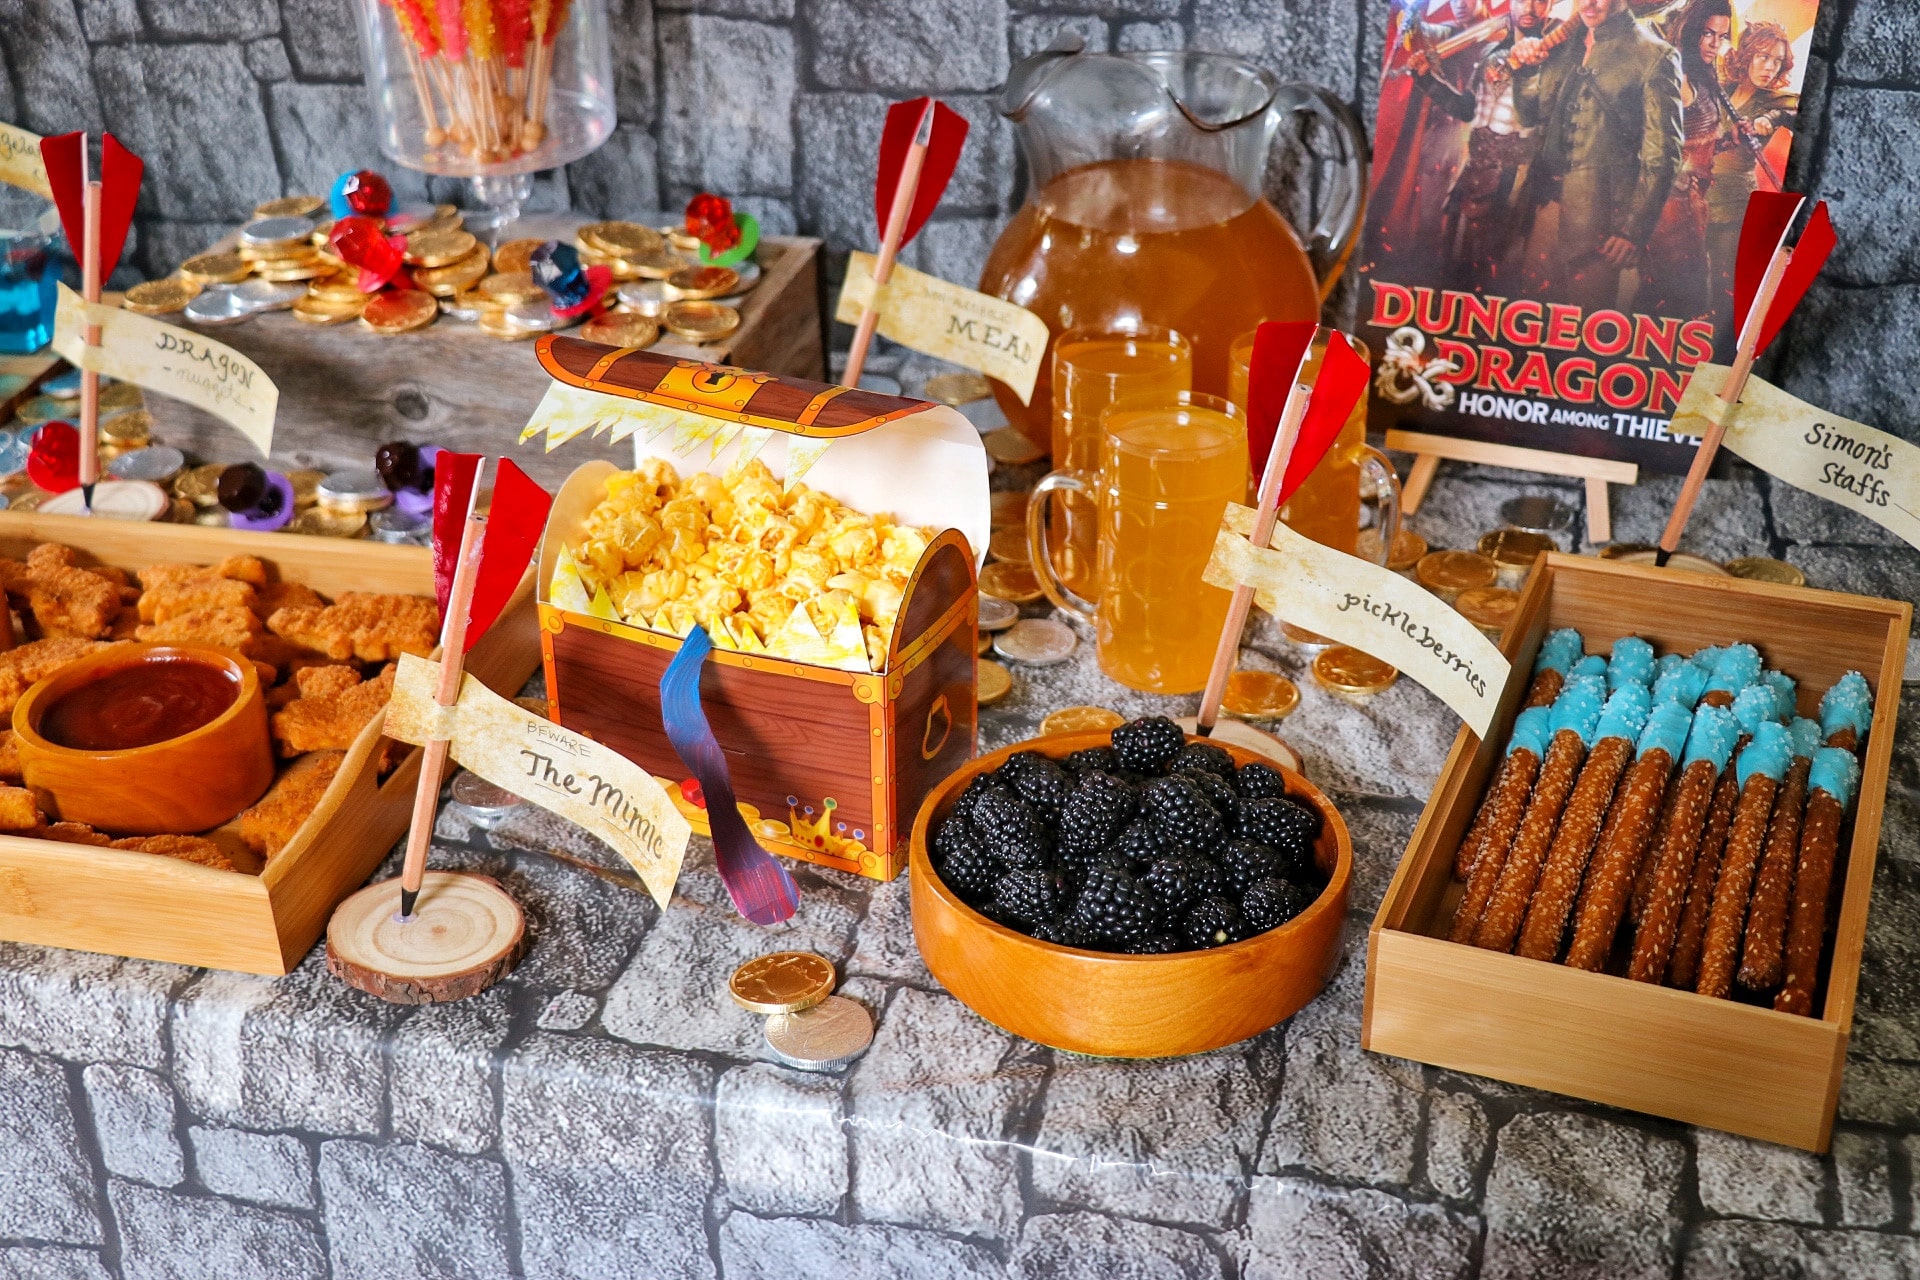 Dungeons and Dragons party ideas: Dungeons and Dragons themed food